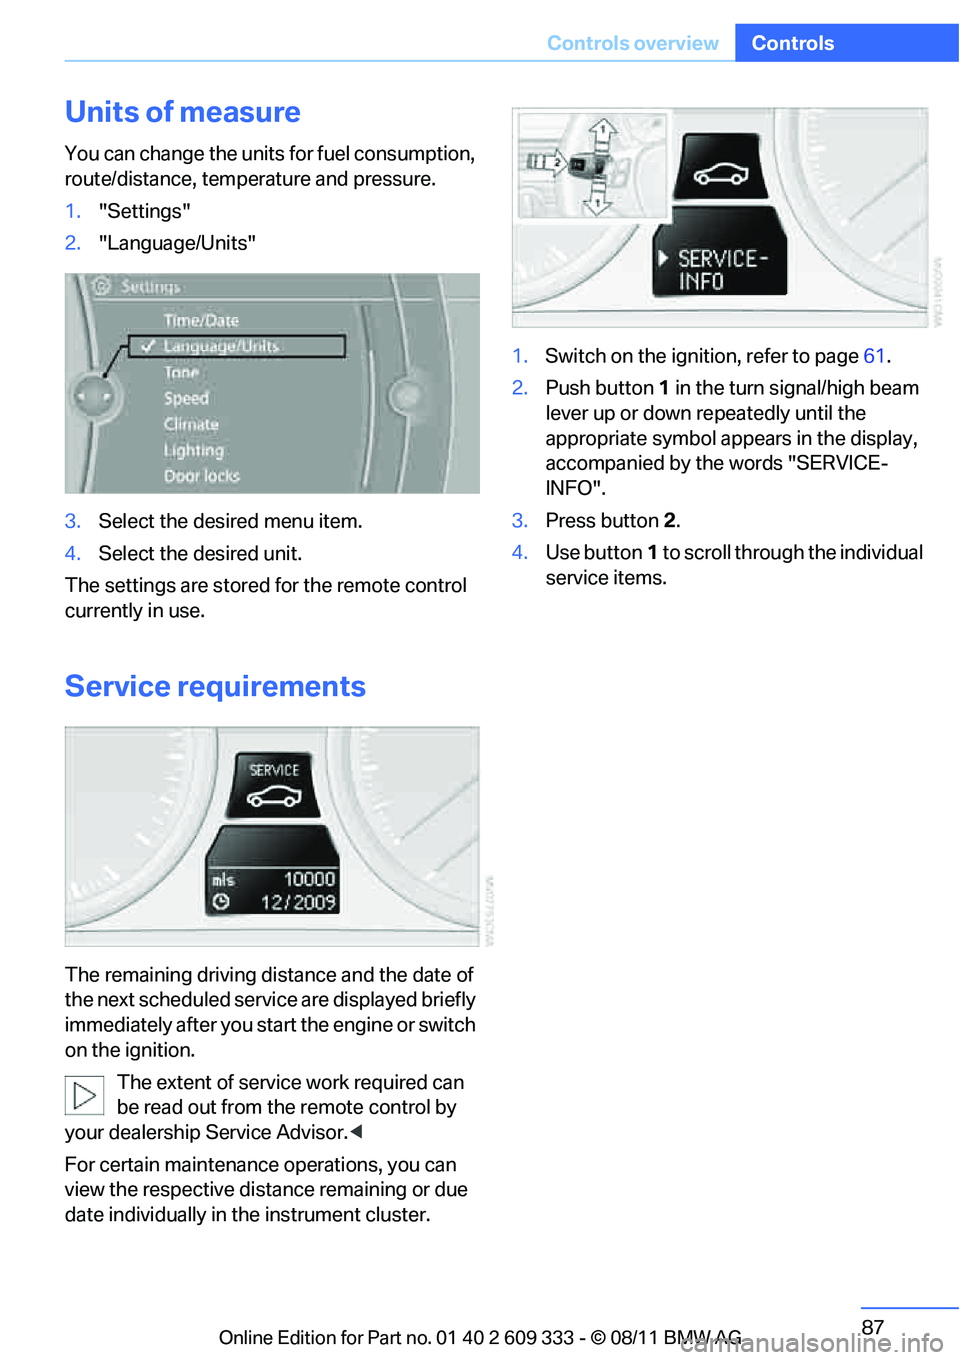 BMW M3 2012  Owners Manual 87
Controls overview
Controls
Units of measure
You can change the units for fuel consumption, 
route/distance, temperature and pressure.
1.
"Settings"
2. "Language/Units"
3. Select the desired menu it